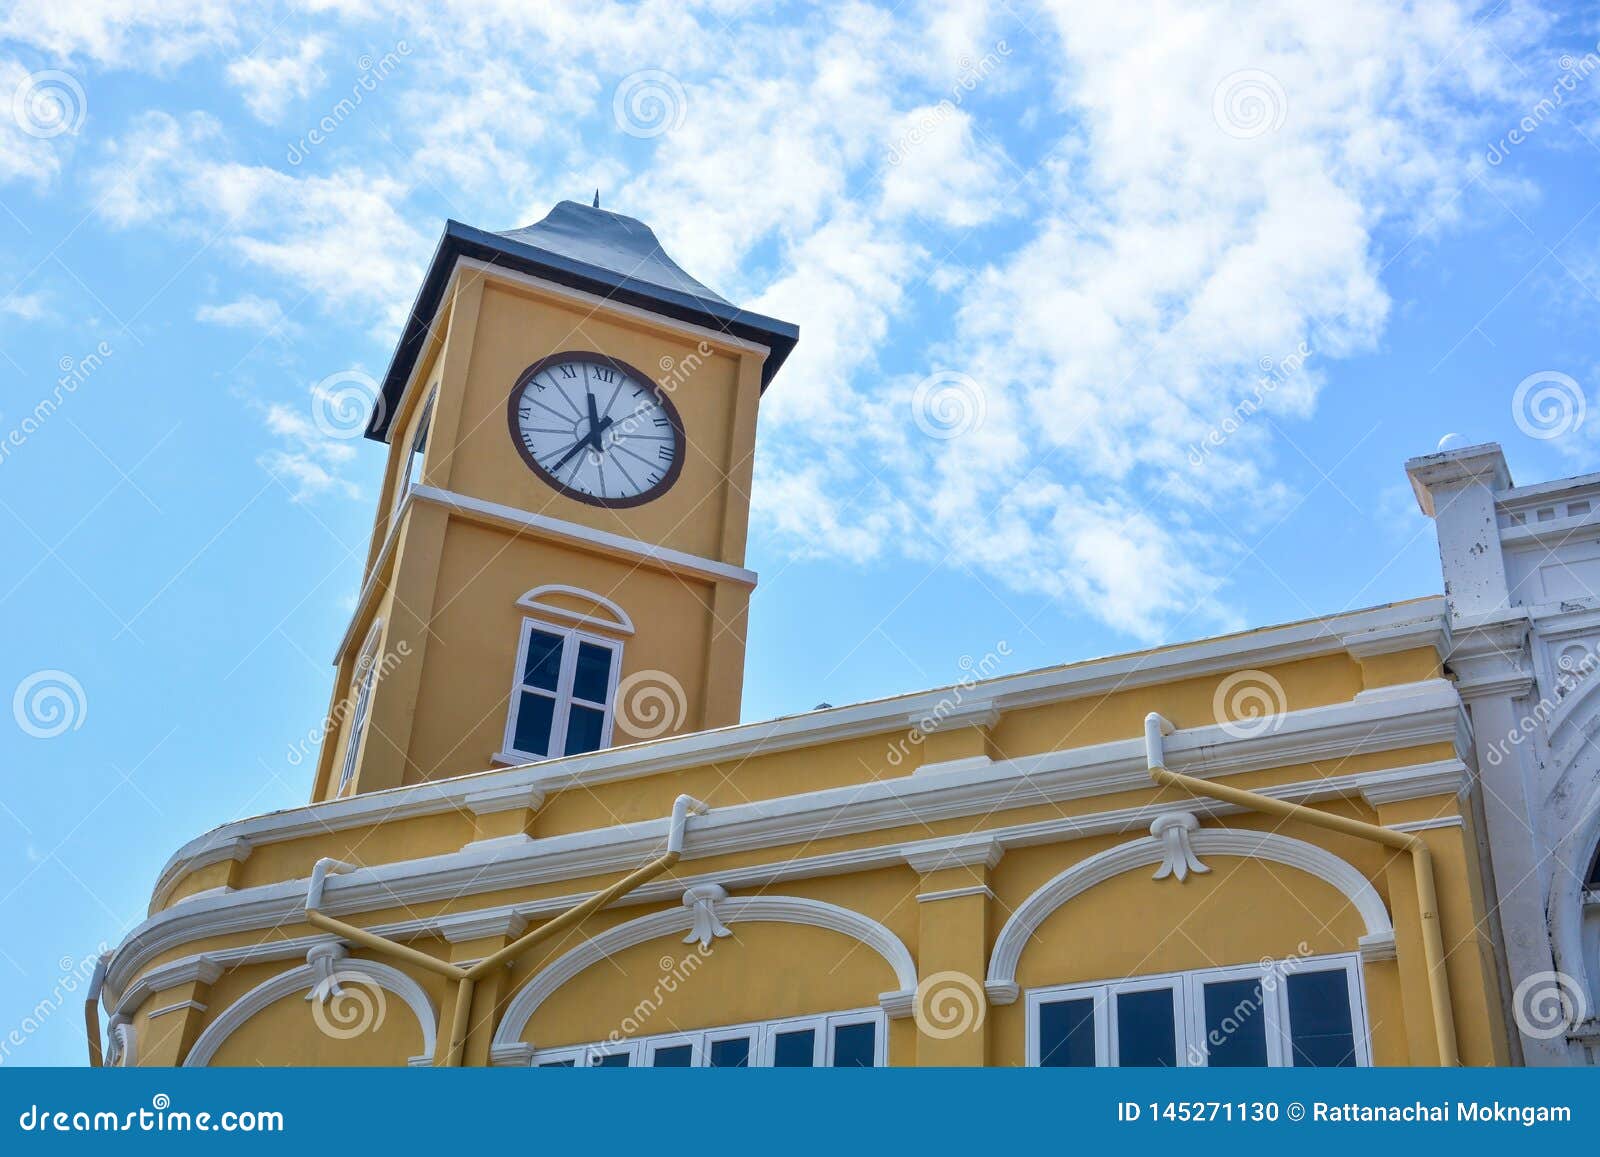 yellow building with clock tower in chino-portuguese style on blue sky background, phuket old town, thailand